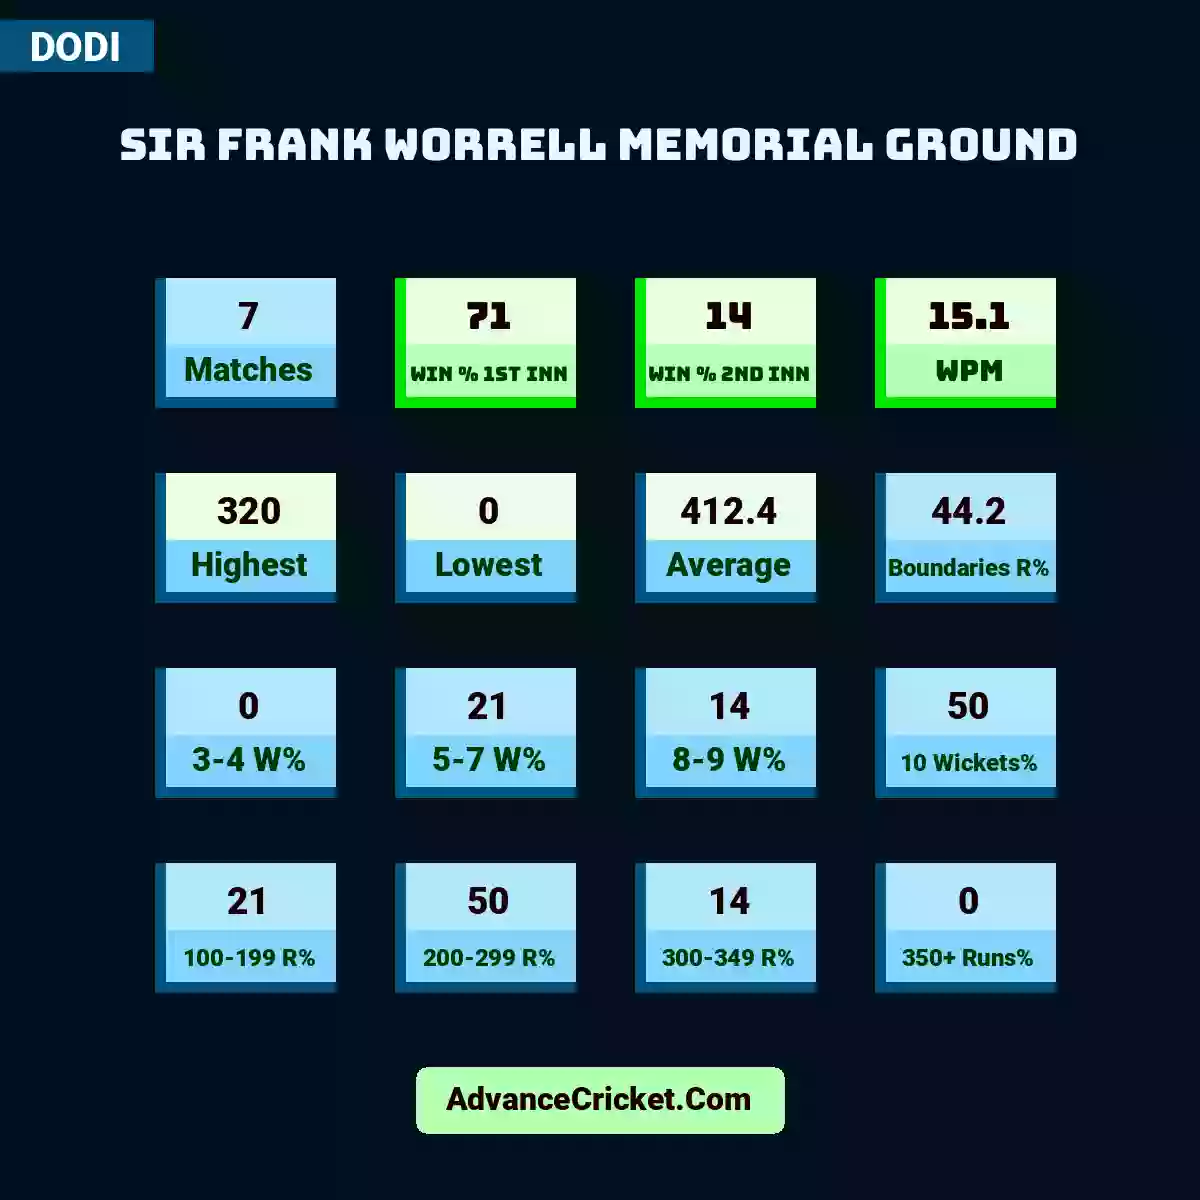 Image showing Sir Frank Worrell Memorial Ground with Matches: 7, Win % 1st Inn: 71, Win % 2nd Inn: 14, WPM: 15.1, Highest: 320, Lowest: 0, Average: 412.4, Boundaries R%: 44.2, 3-4 W%: 0, 5-7 W%: 21, 8-9 W%: 14, 10 Wickets%: 50, 100-199 R%: 21, 200-299 R%: 50, 300-349 R%: 14, 350+ Runs%: 0.